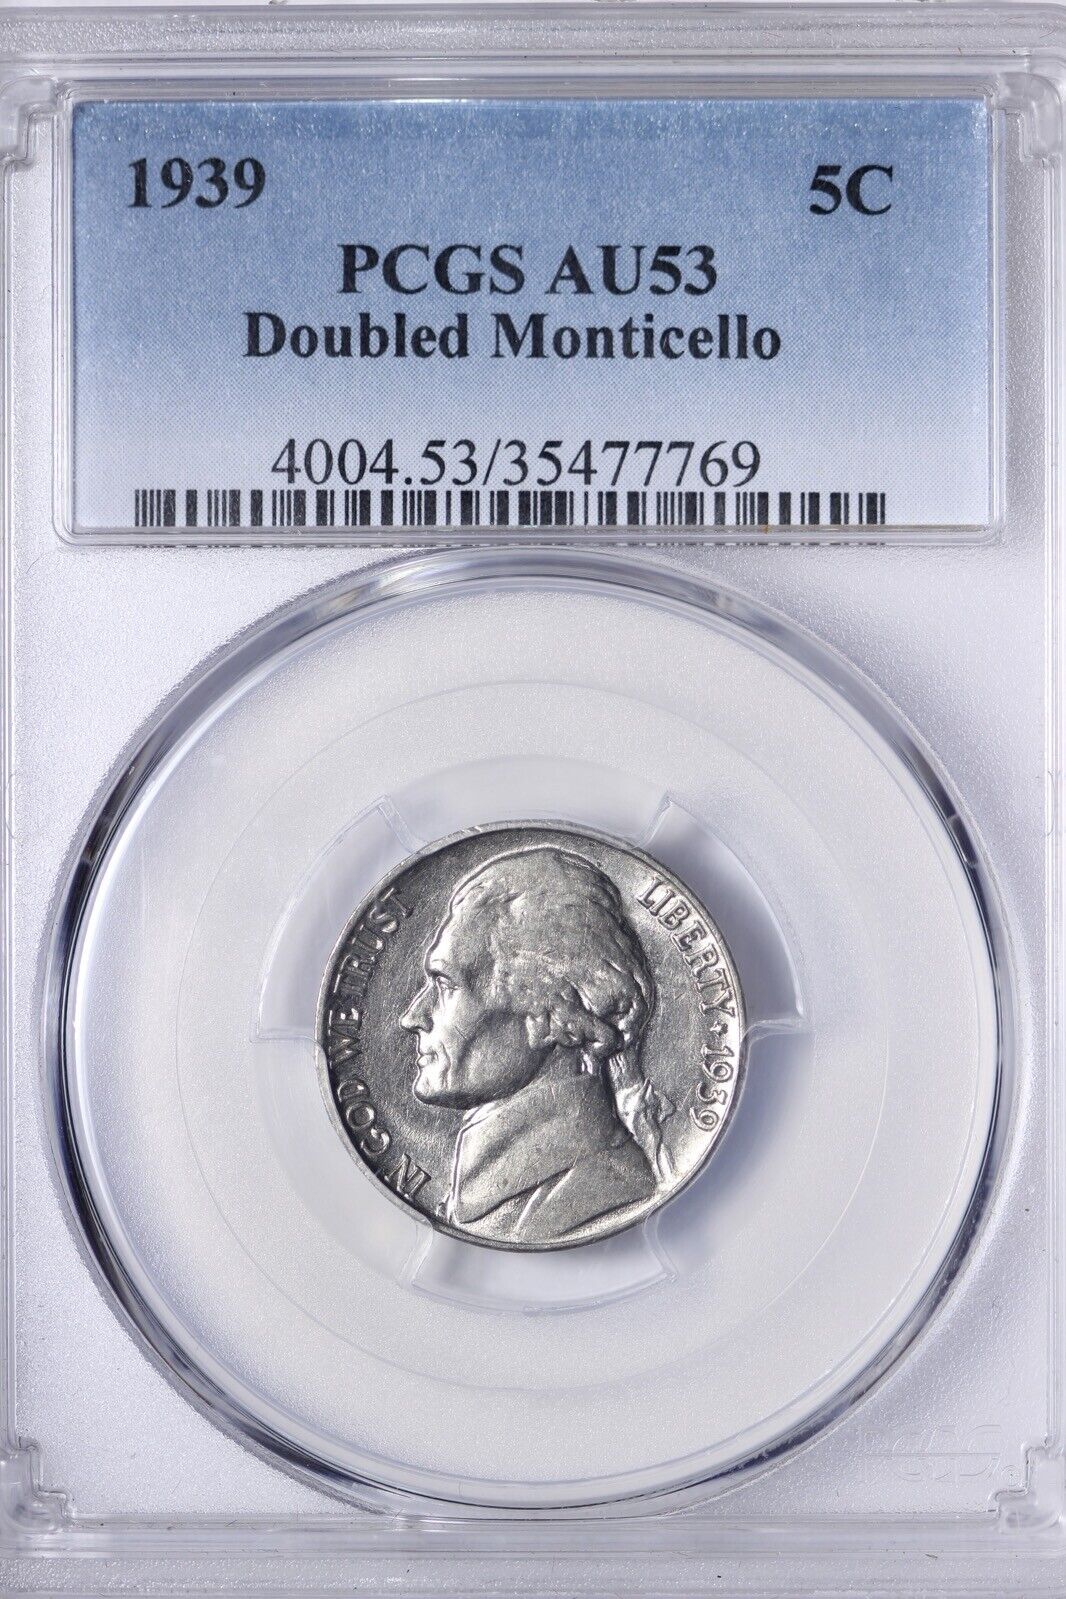 1939 Doubled Monticello Jefferson Nickel PCGS AU53 Sweet Coin ICMJ